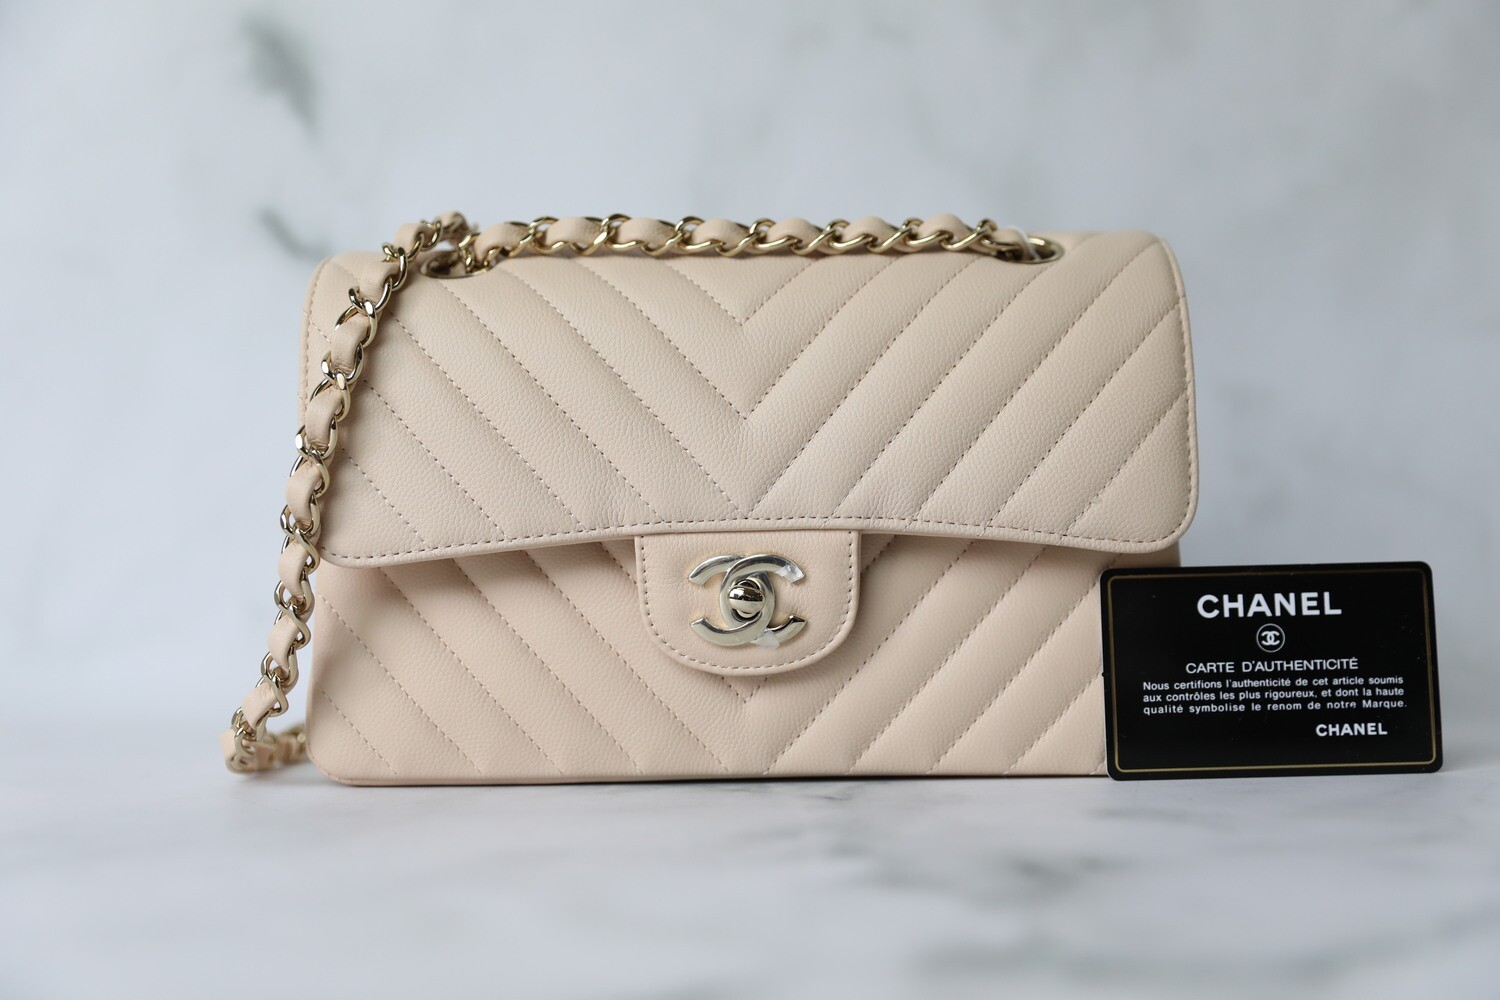 Chanel Fashion Therapy Small Flap Bag, Beige Caviar Leather, Brushed Gold  Hardware, New in Box - Julia Rose Boston